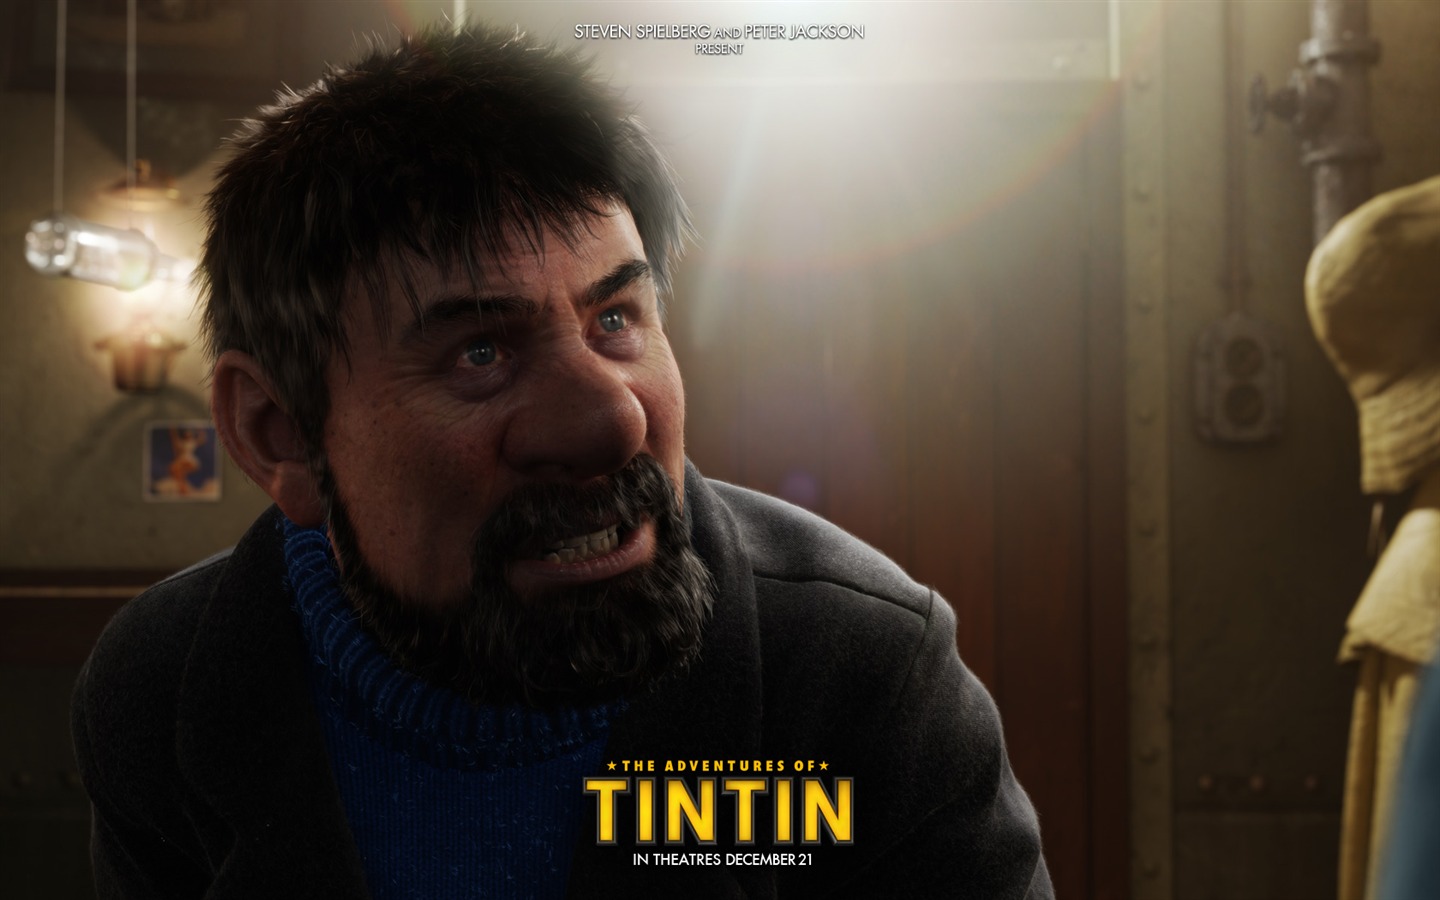 The Adventures of Tintin Tapety HD #3 - 1440x900